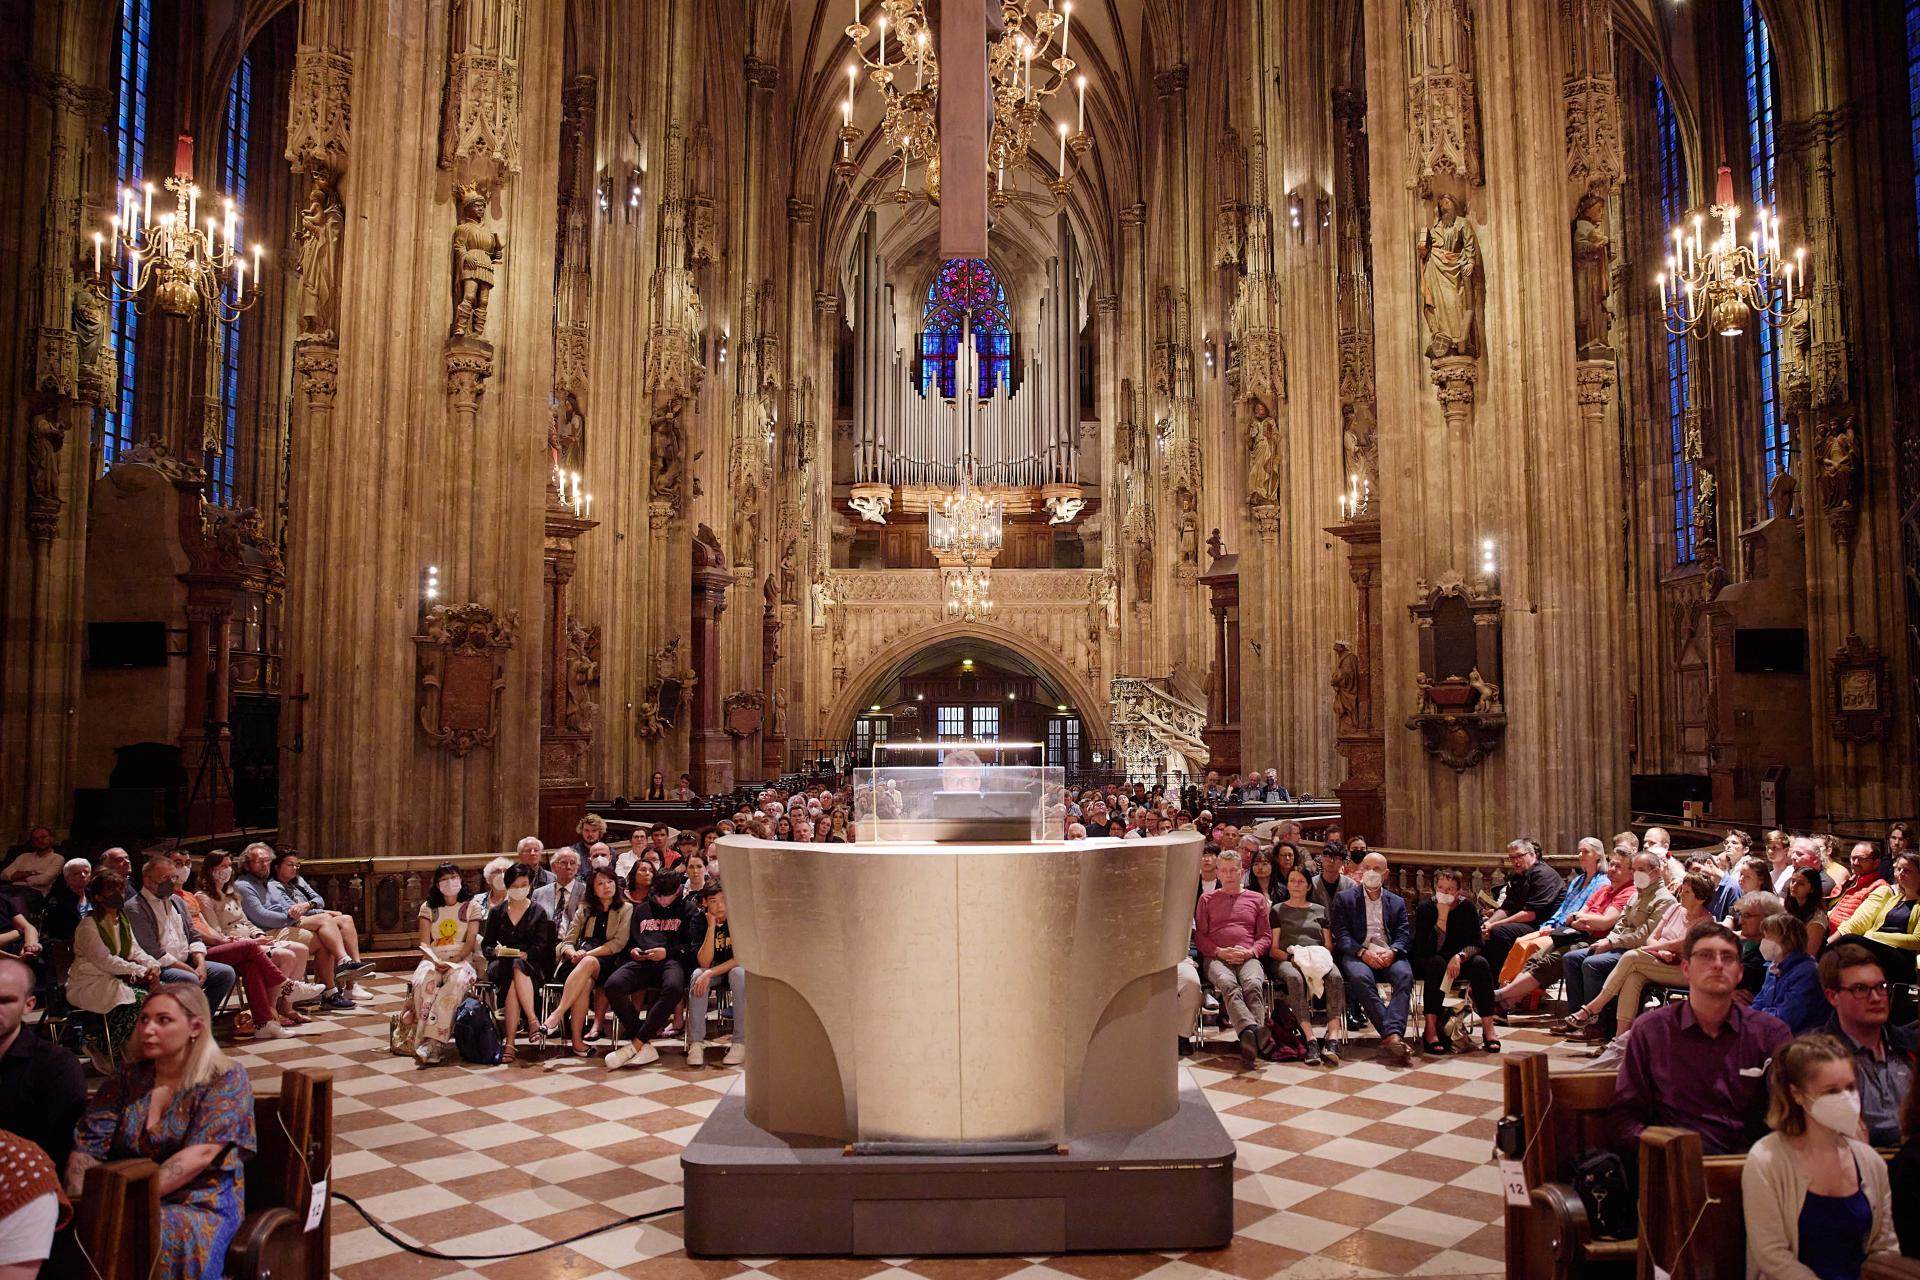 Giant Organ Concerts at St Stephen´s Cathedral